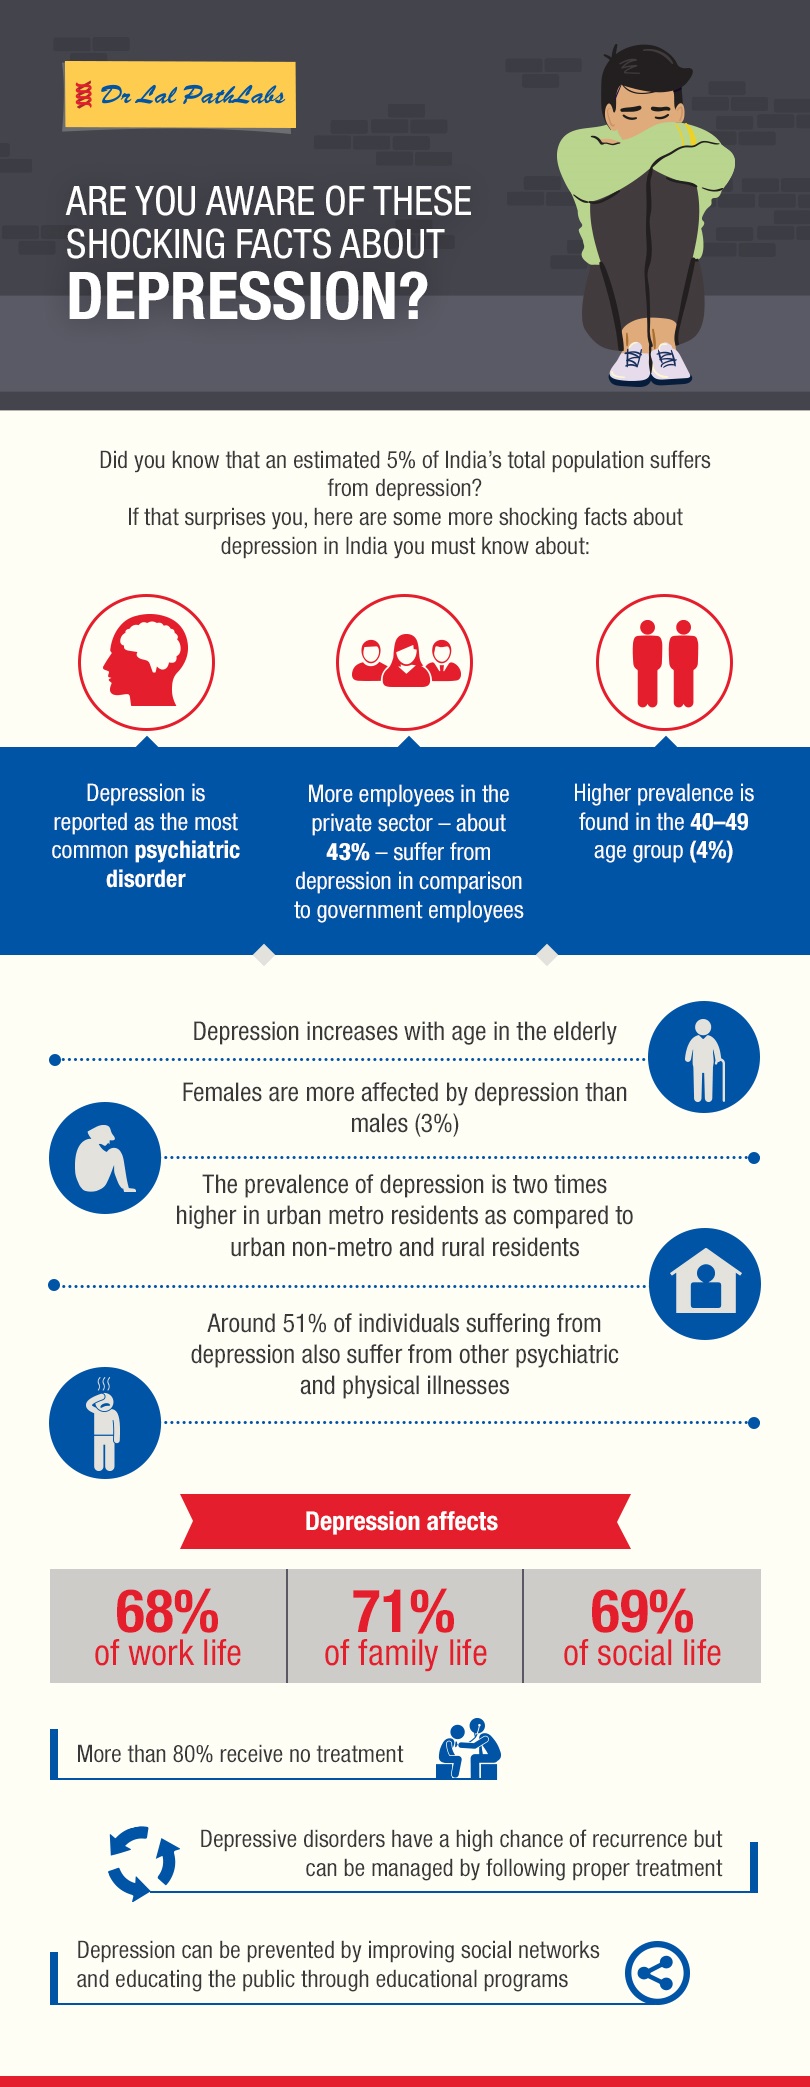 Are You Aware Of These Shocking Facts About Depression?